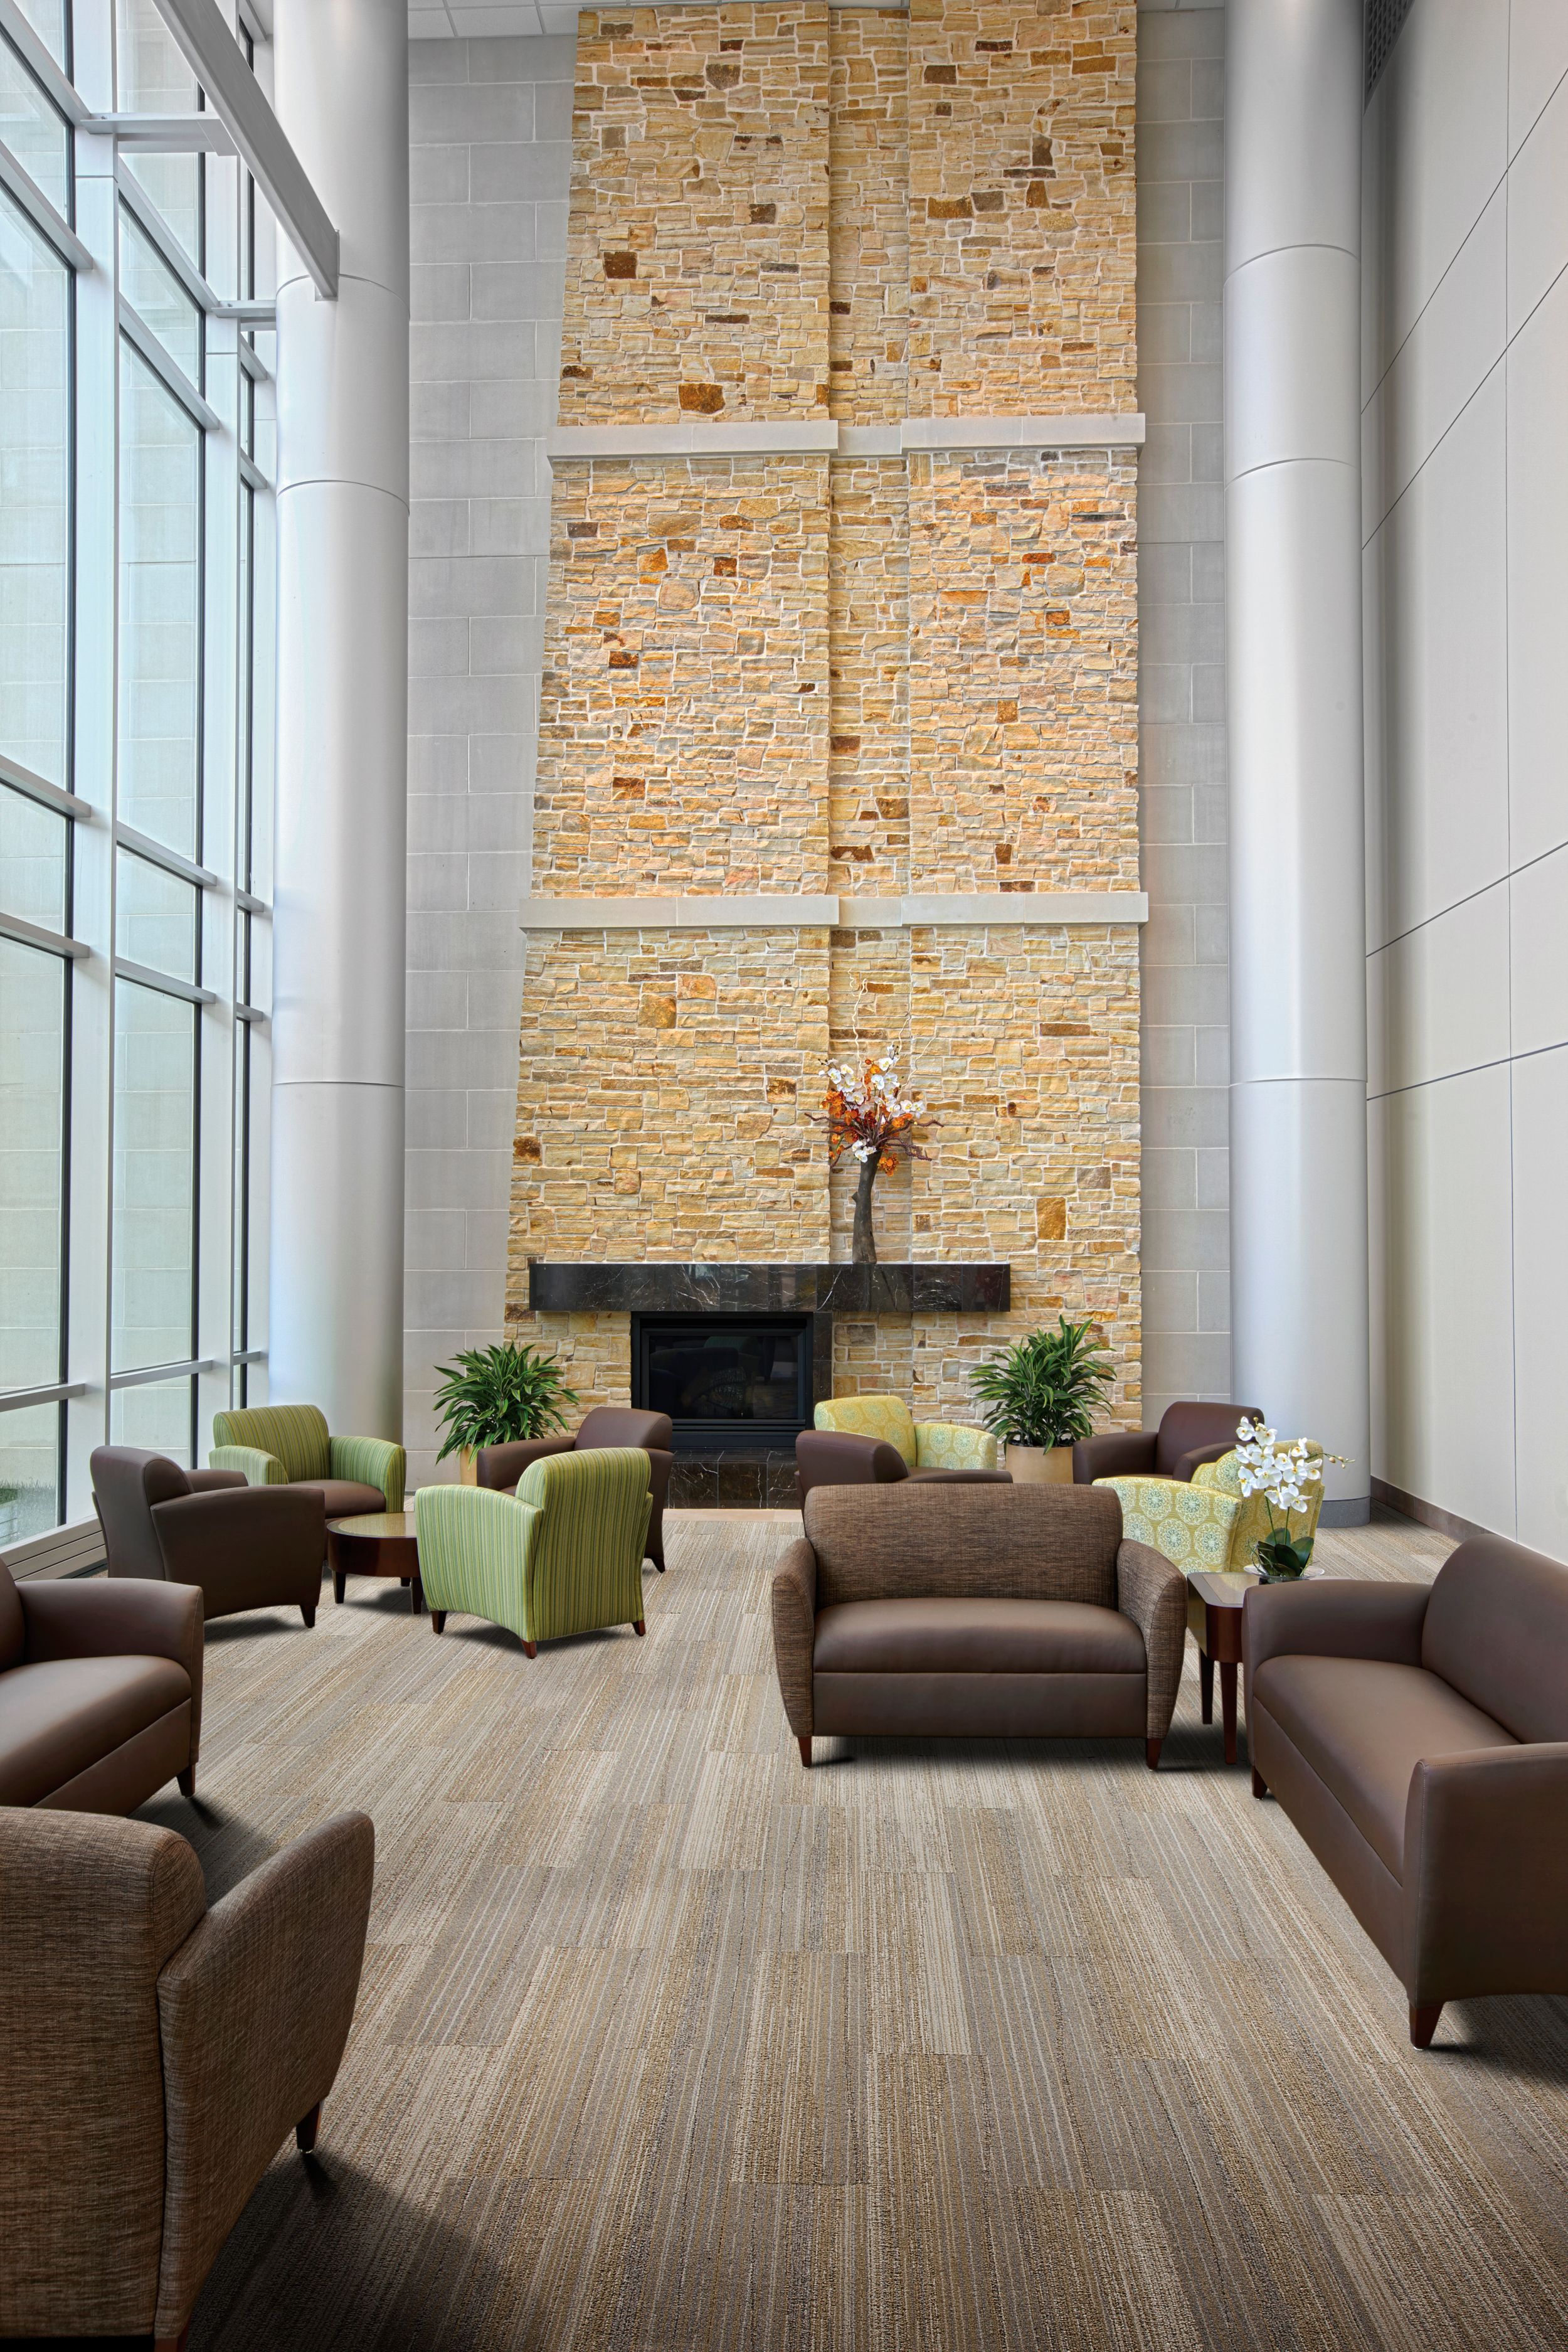 Interface Walk the Plank plank carpet tile in healthcare waiting area with fireplace and floor to ceiling windows imagen número 17